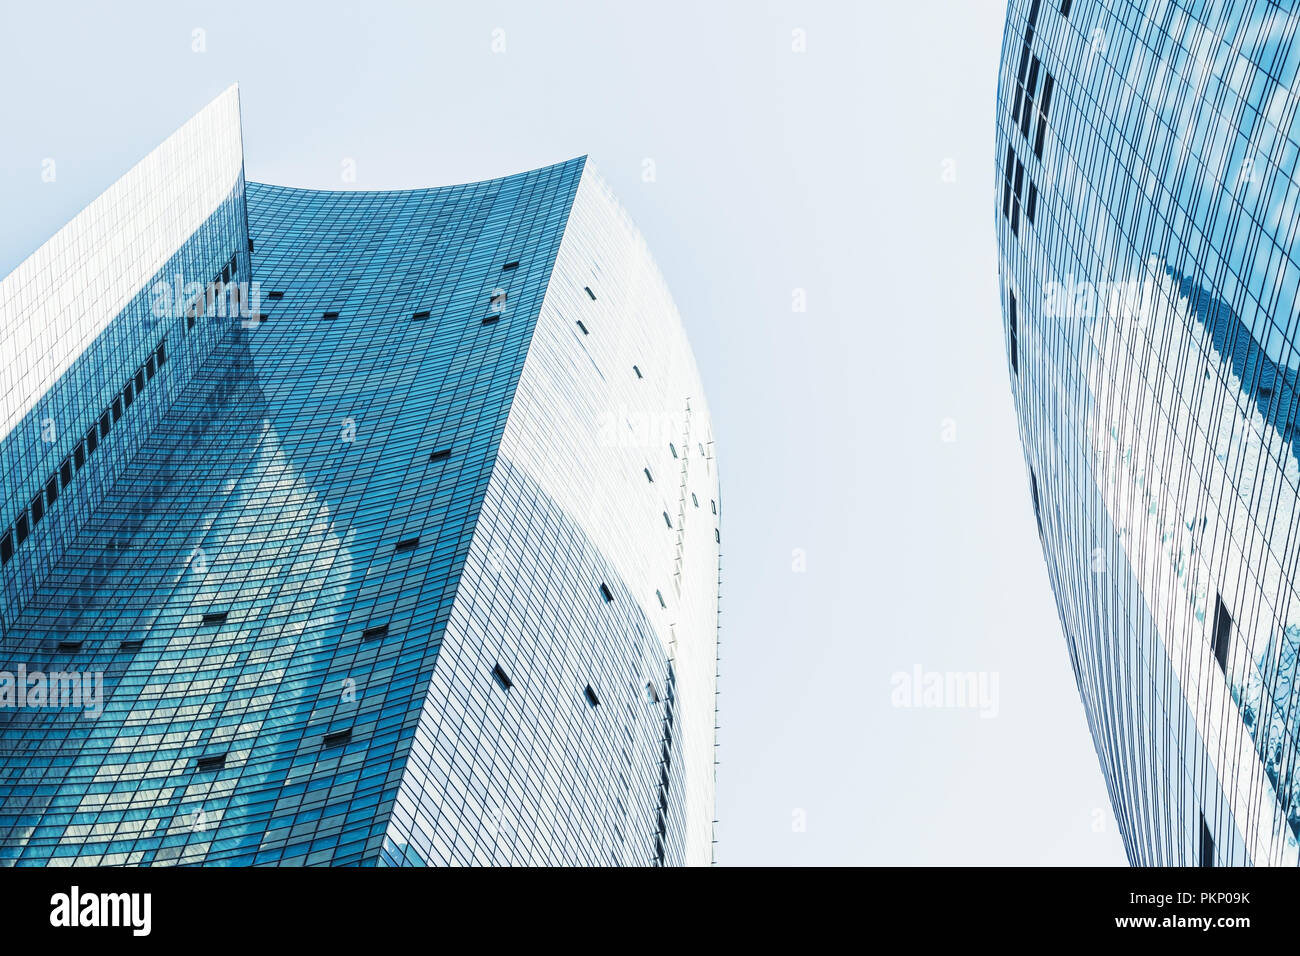 Abstract modern architecture background, cityscape with shiny office towers made of glass and steel under bright sky Stock Photo